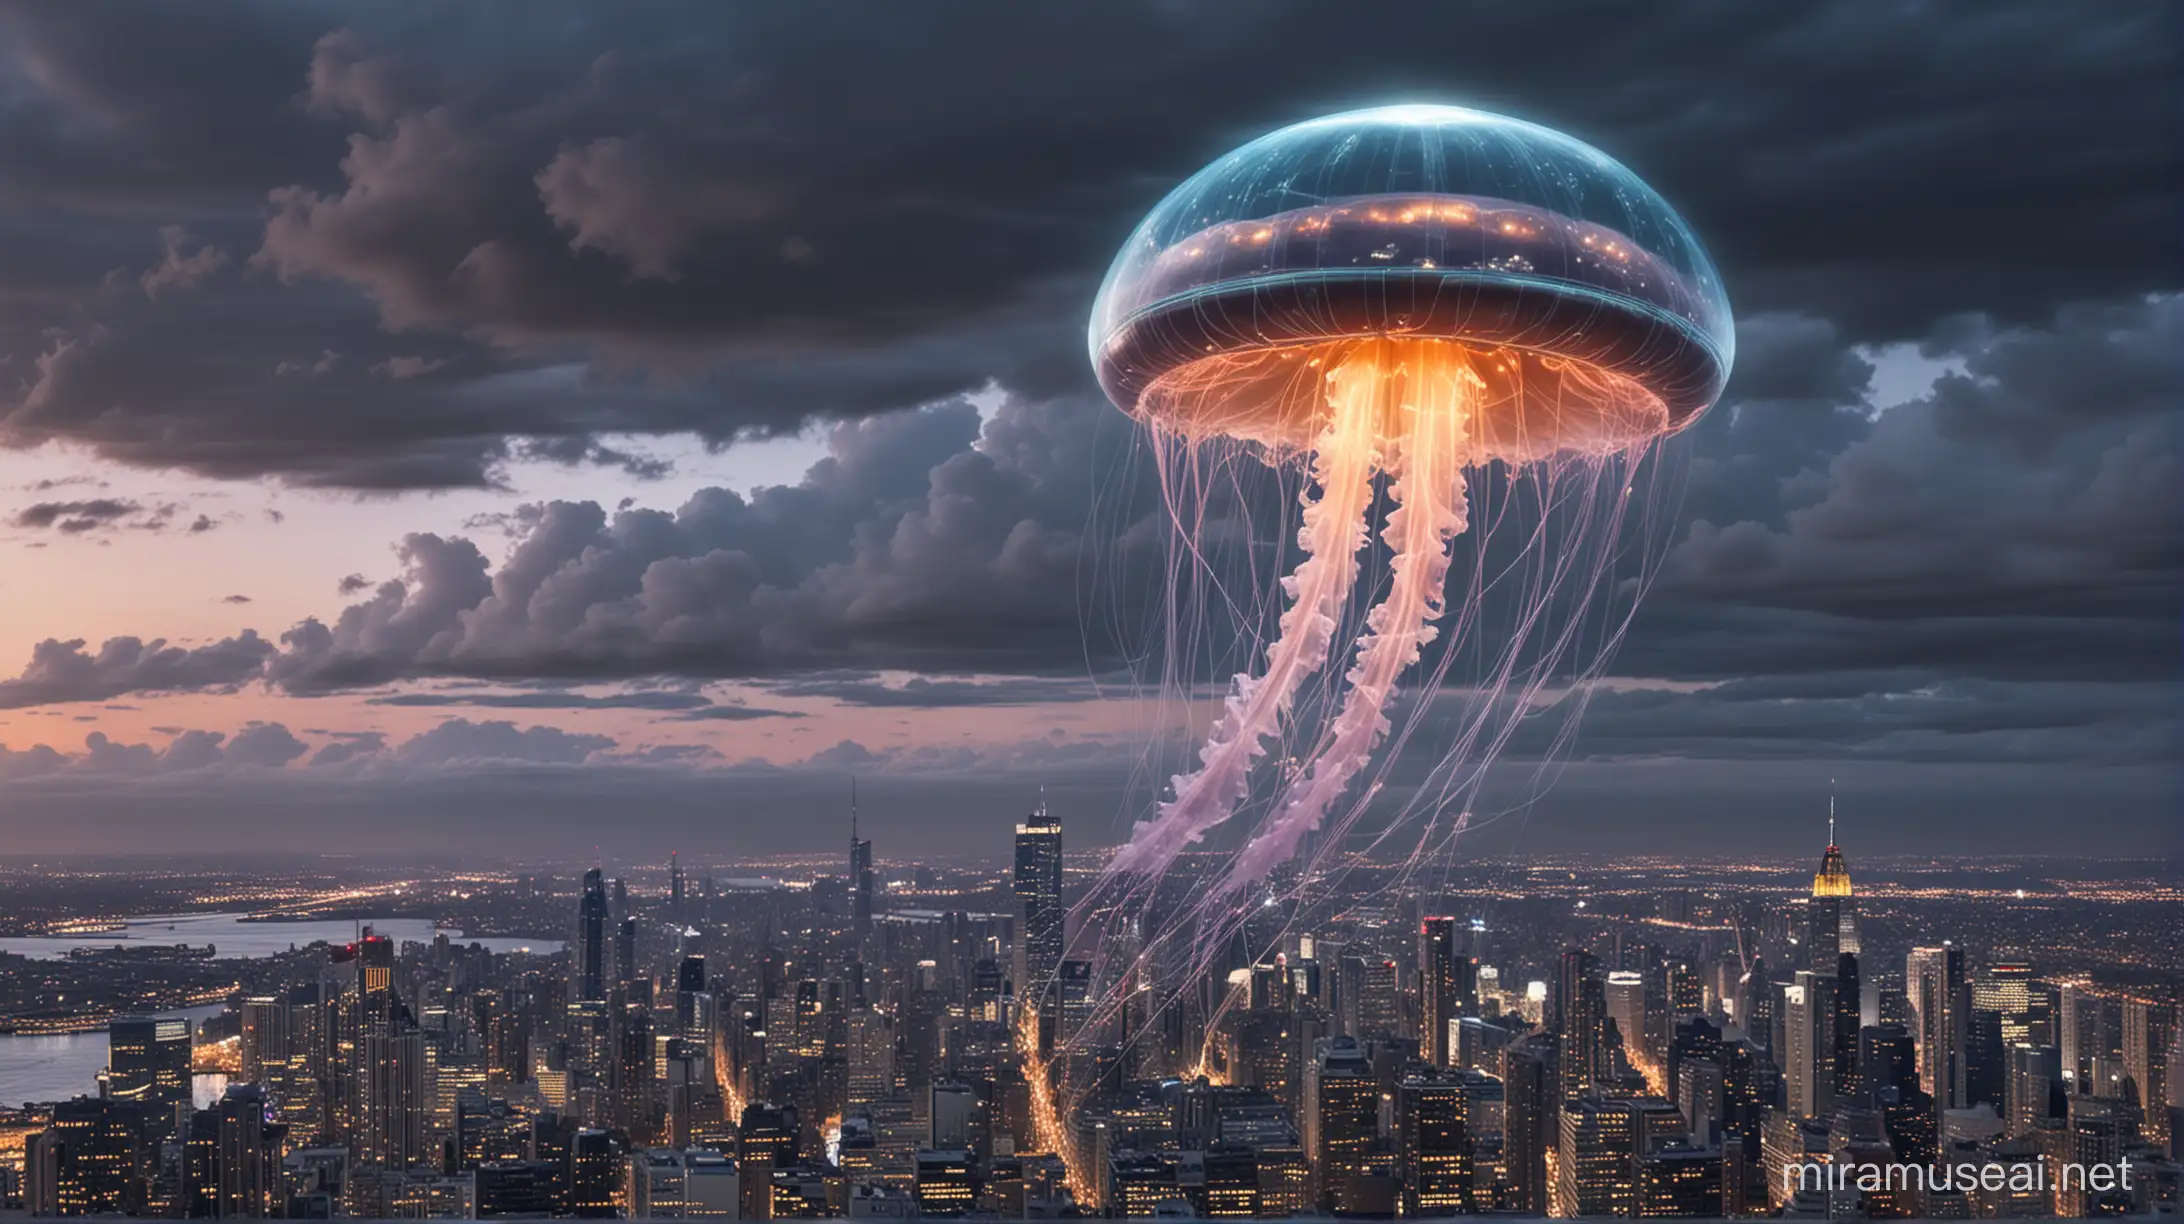 Create a jellyfish over a city which look like a ufo